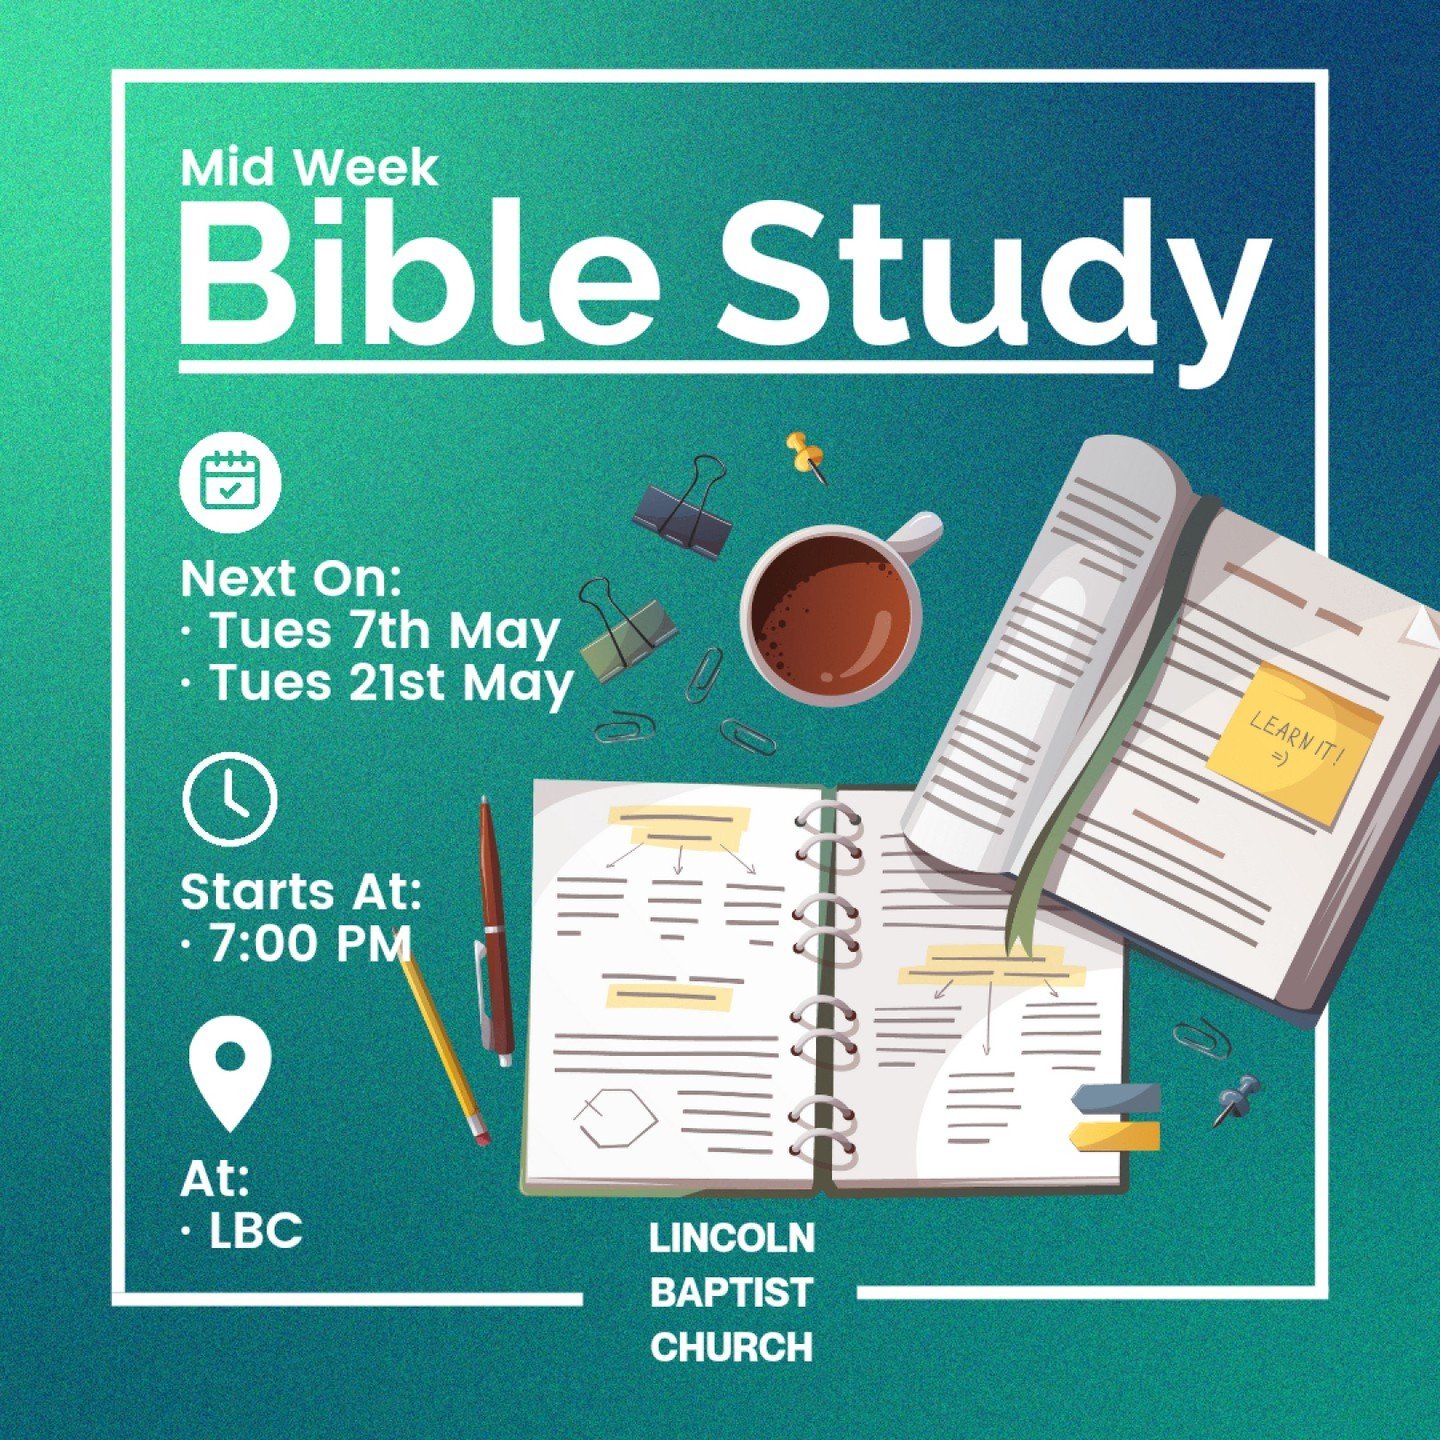 Please join us in May for our mid week Bible studies as we continue to look at Prayer. 
These studies will be held on Tuesday 7th and 21st May at LBC and will begin at 7pm. 
The Studies will be led by our Pastor, Daniel.

Our first Mid week Bible stu